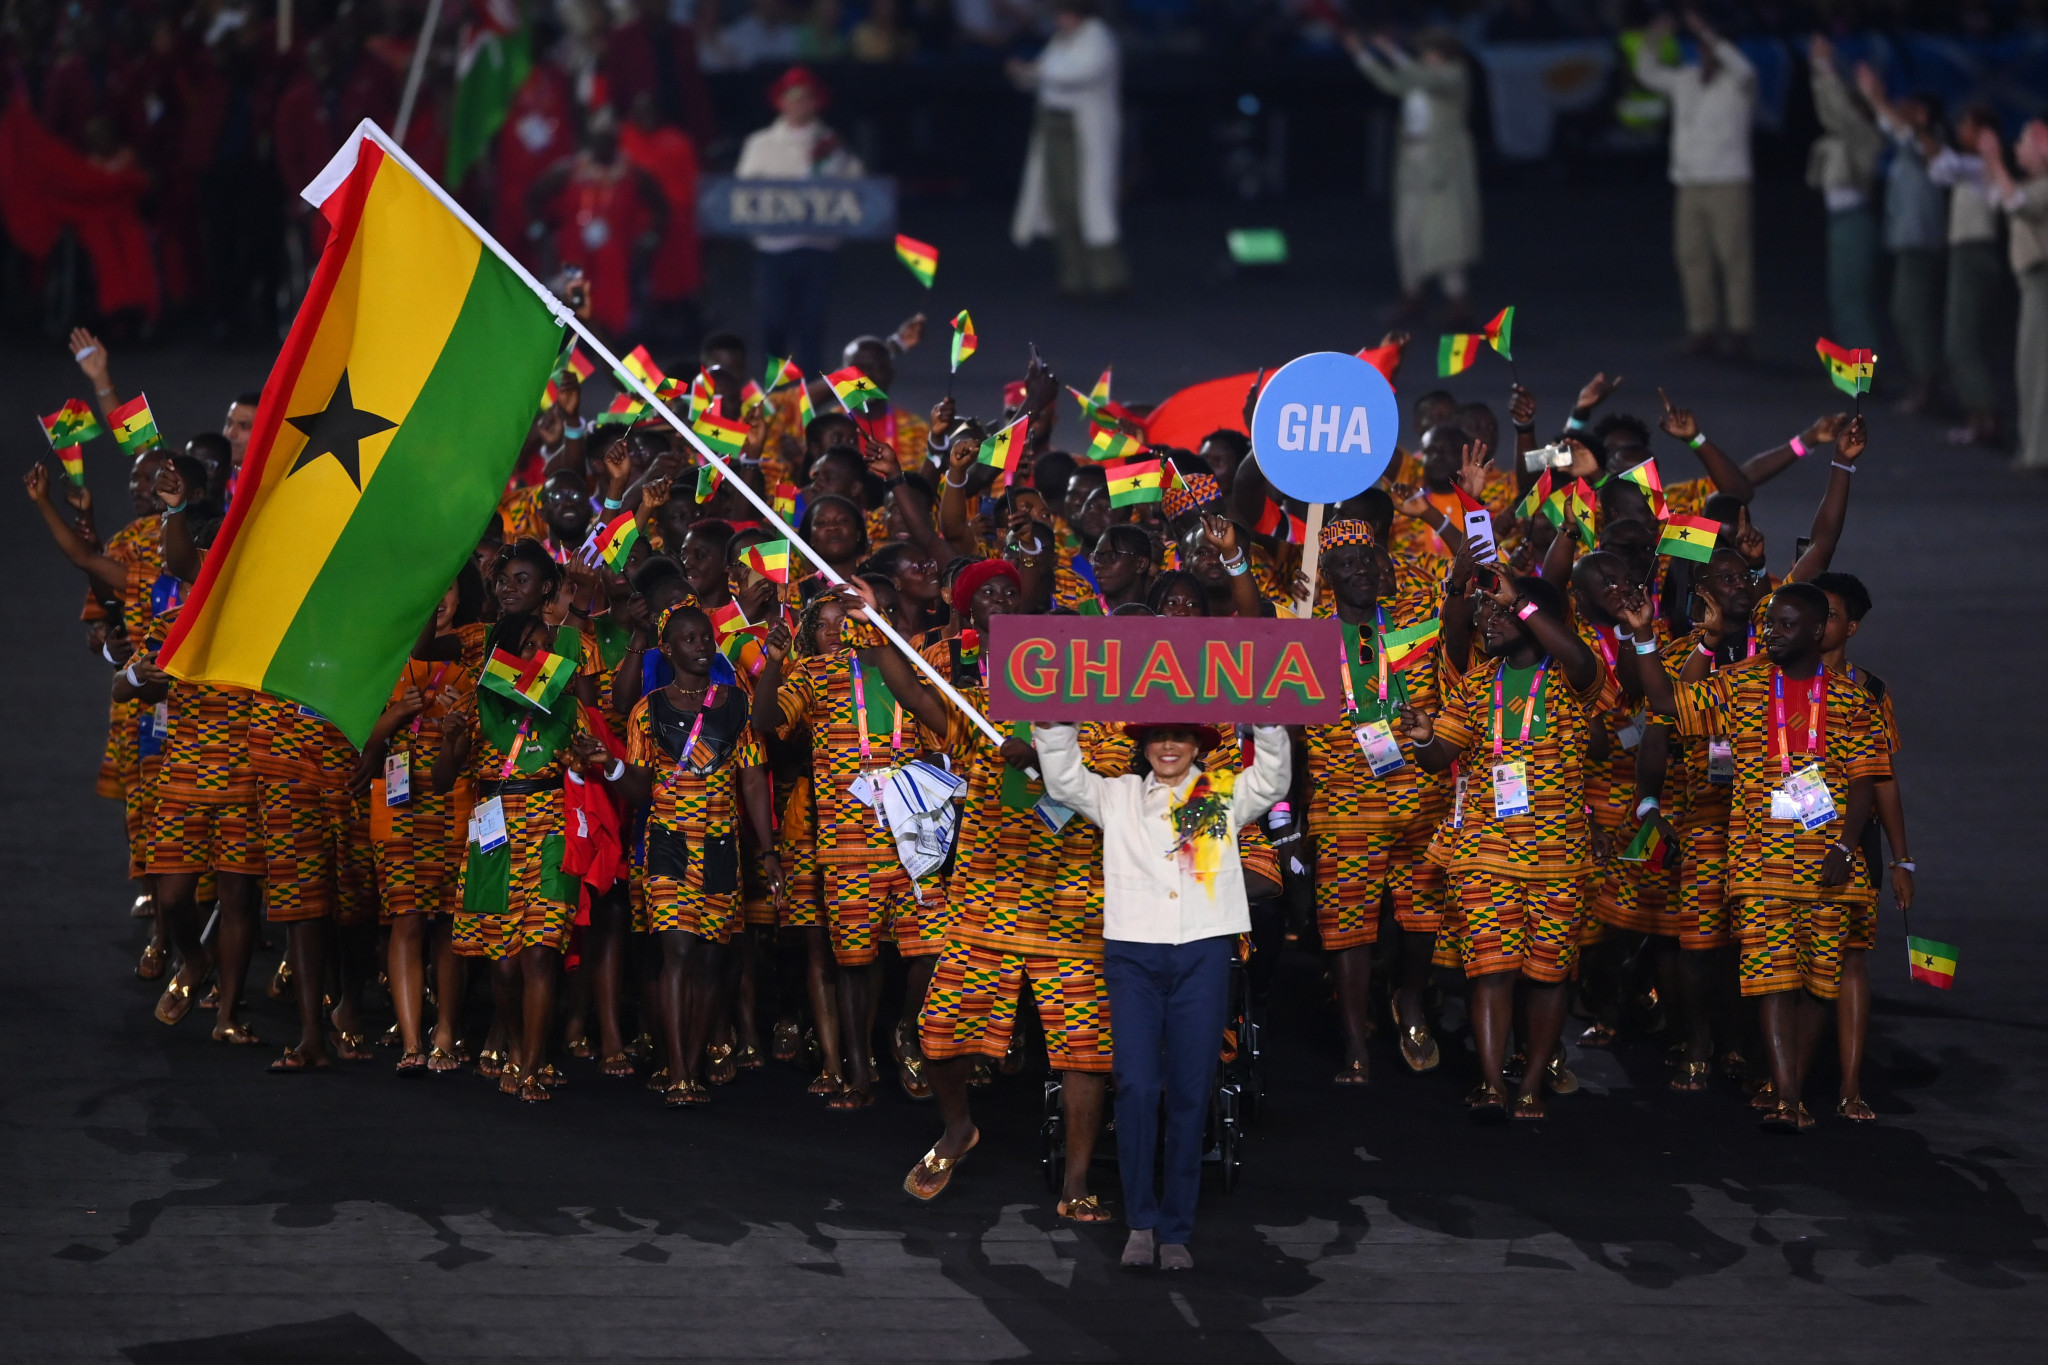 Ghana is due to host the African Games for the first time next year, but an ongoing dispute over the ownership of the event threatens to overshadow it ©Getty Images